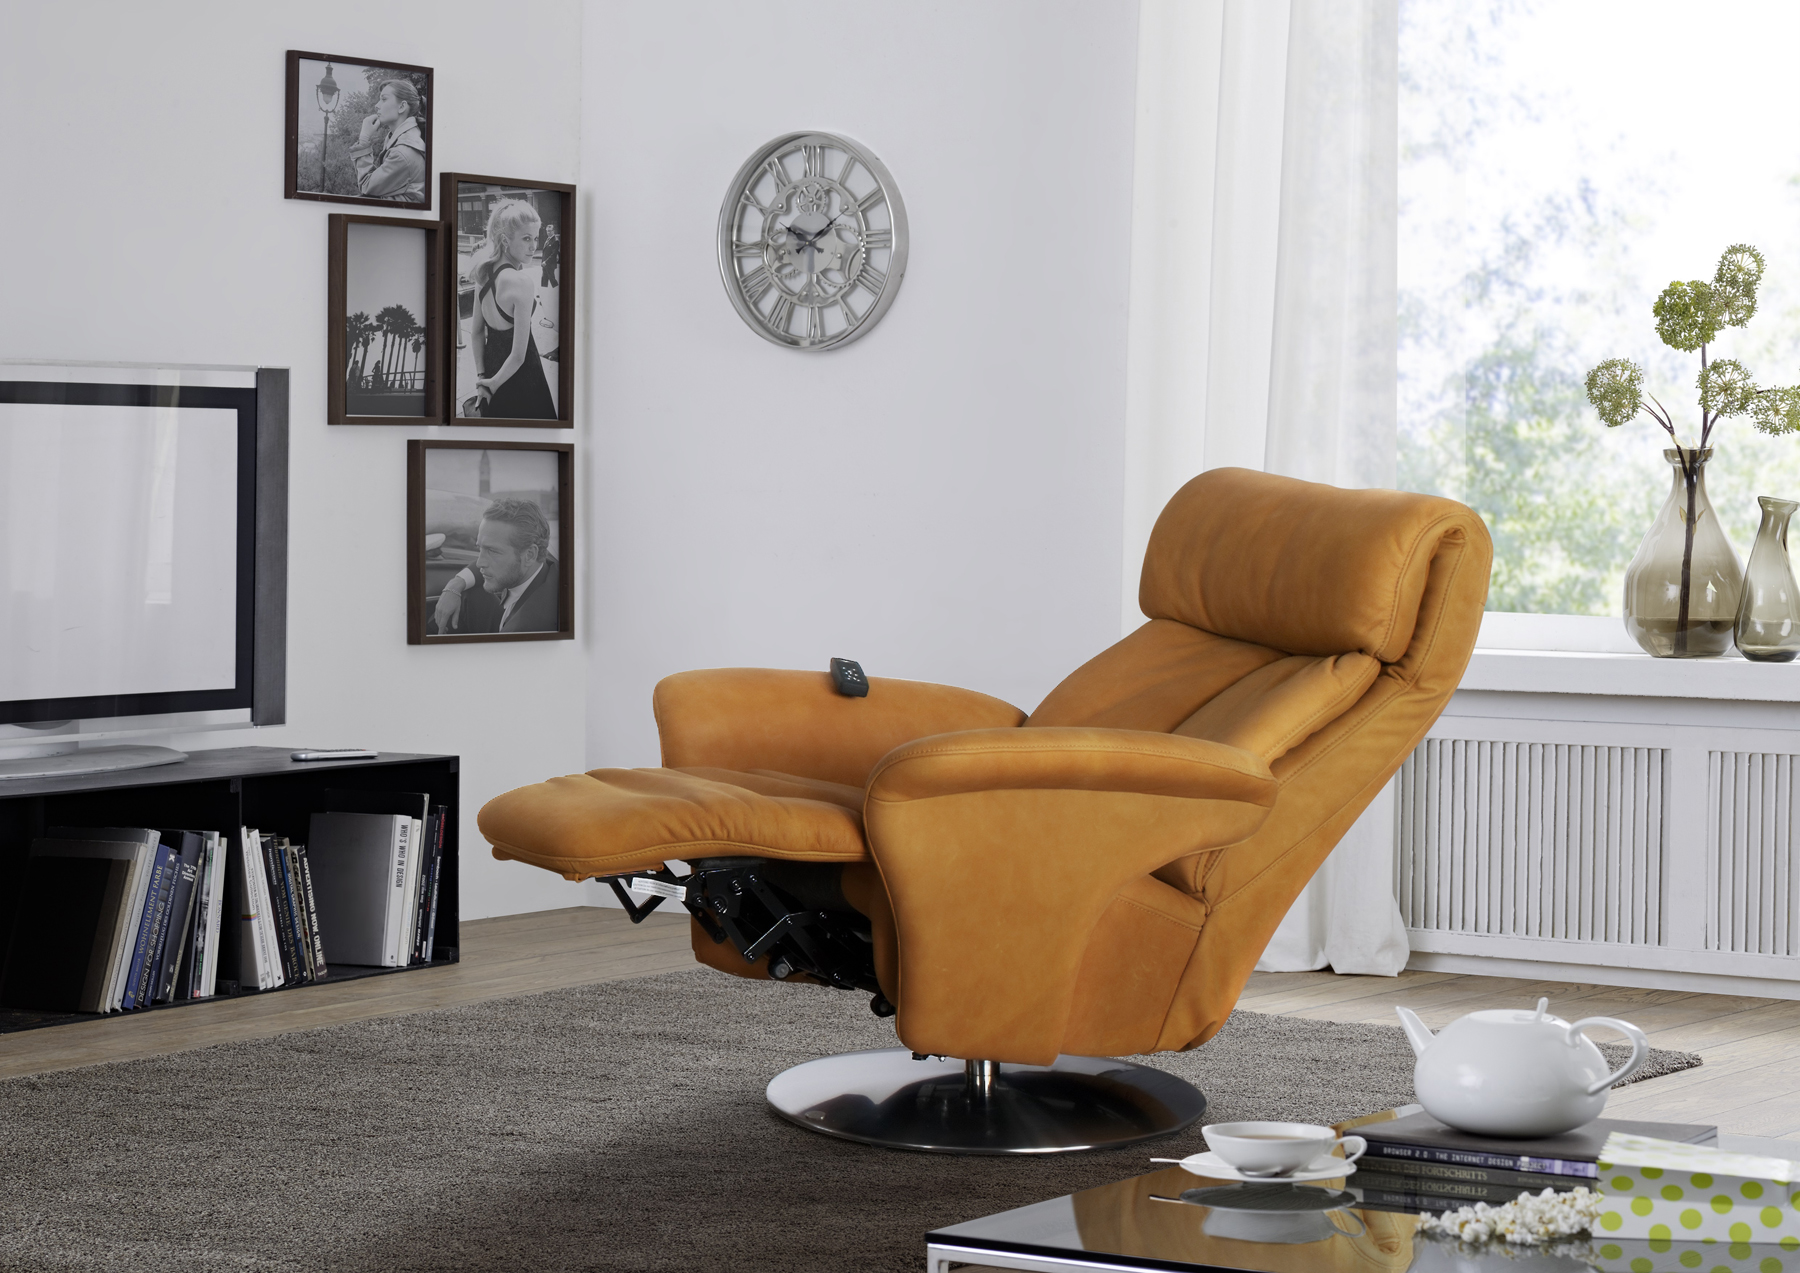 HIMOLLA SINARTRA ORANGE LEATHER CHAIR FULLY RECLINED